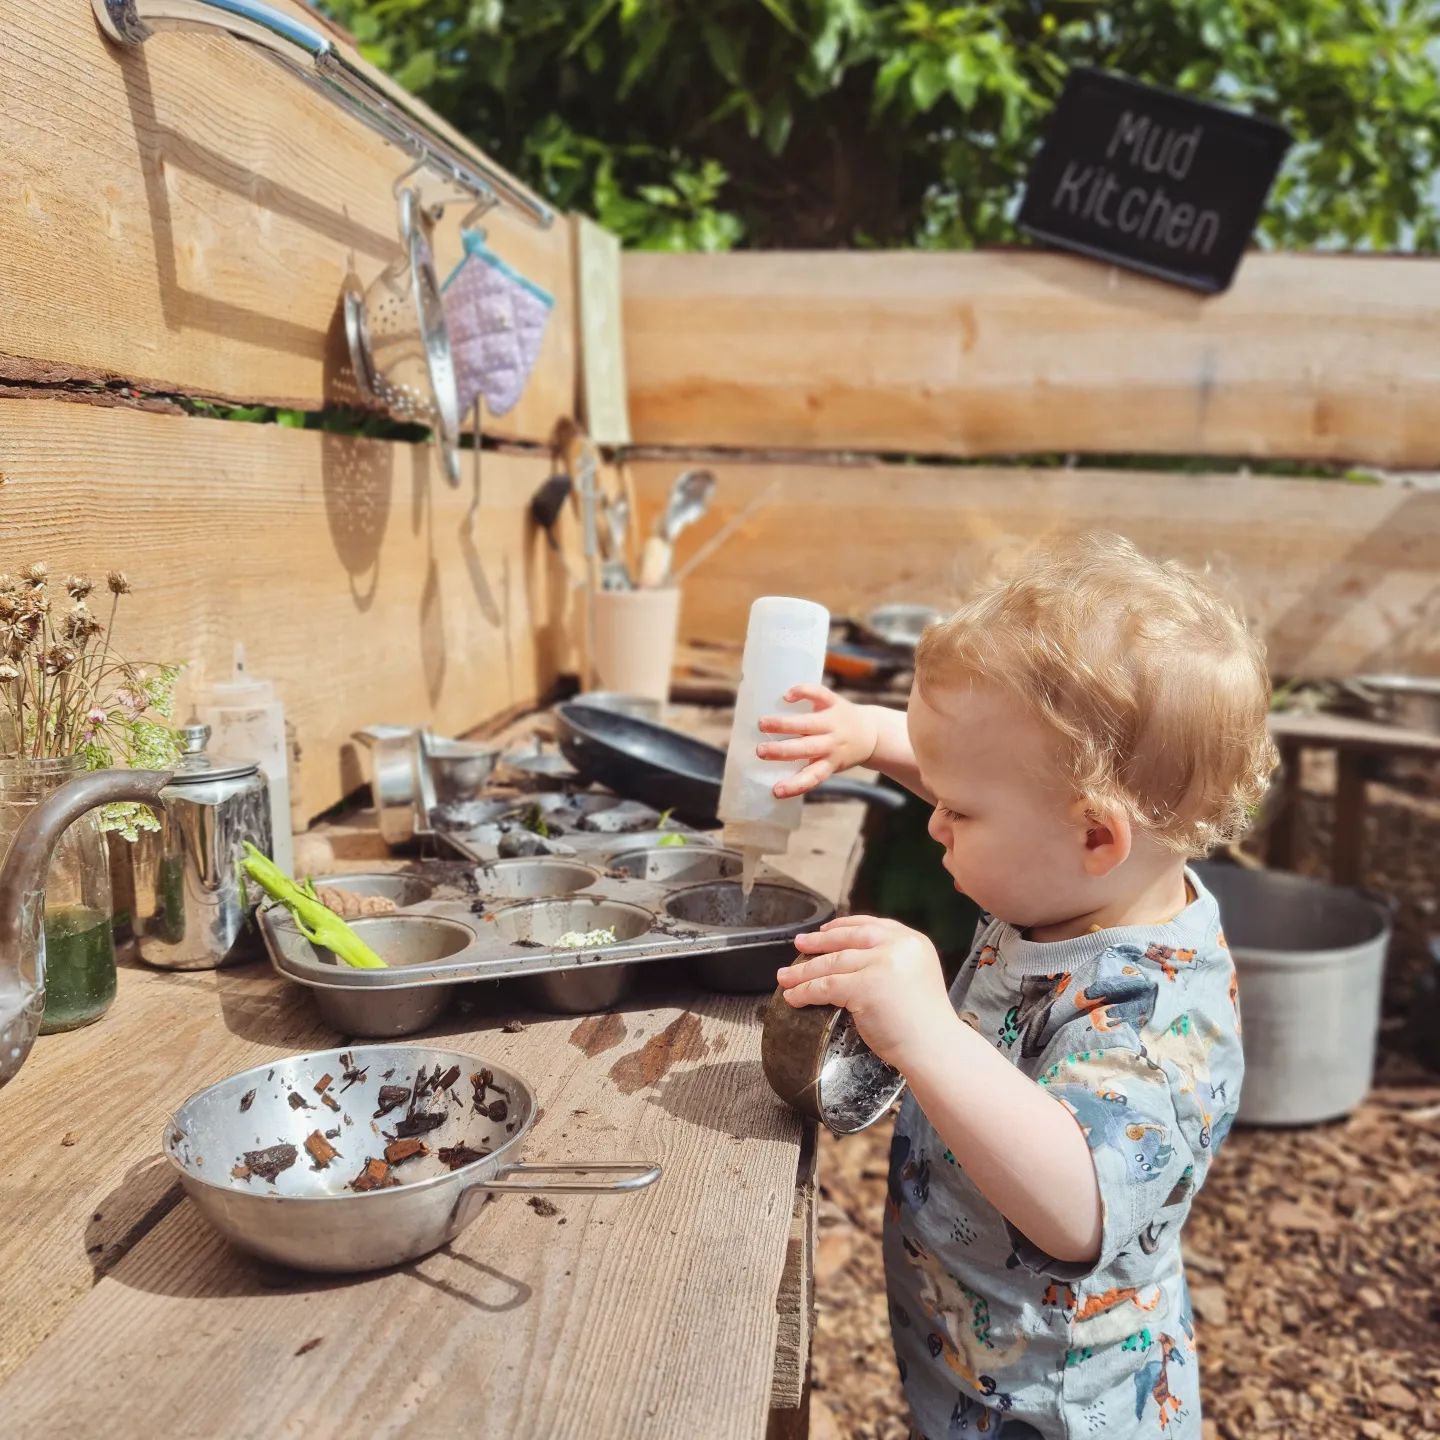 DIY mud kitchen with cake pans and cooking utensils. Photo by instagram user @wild_little_wonderers